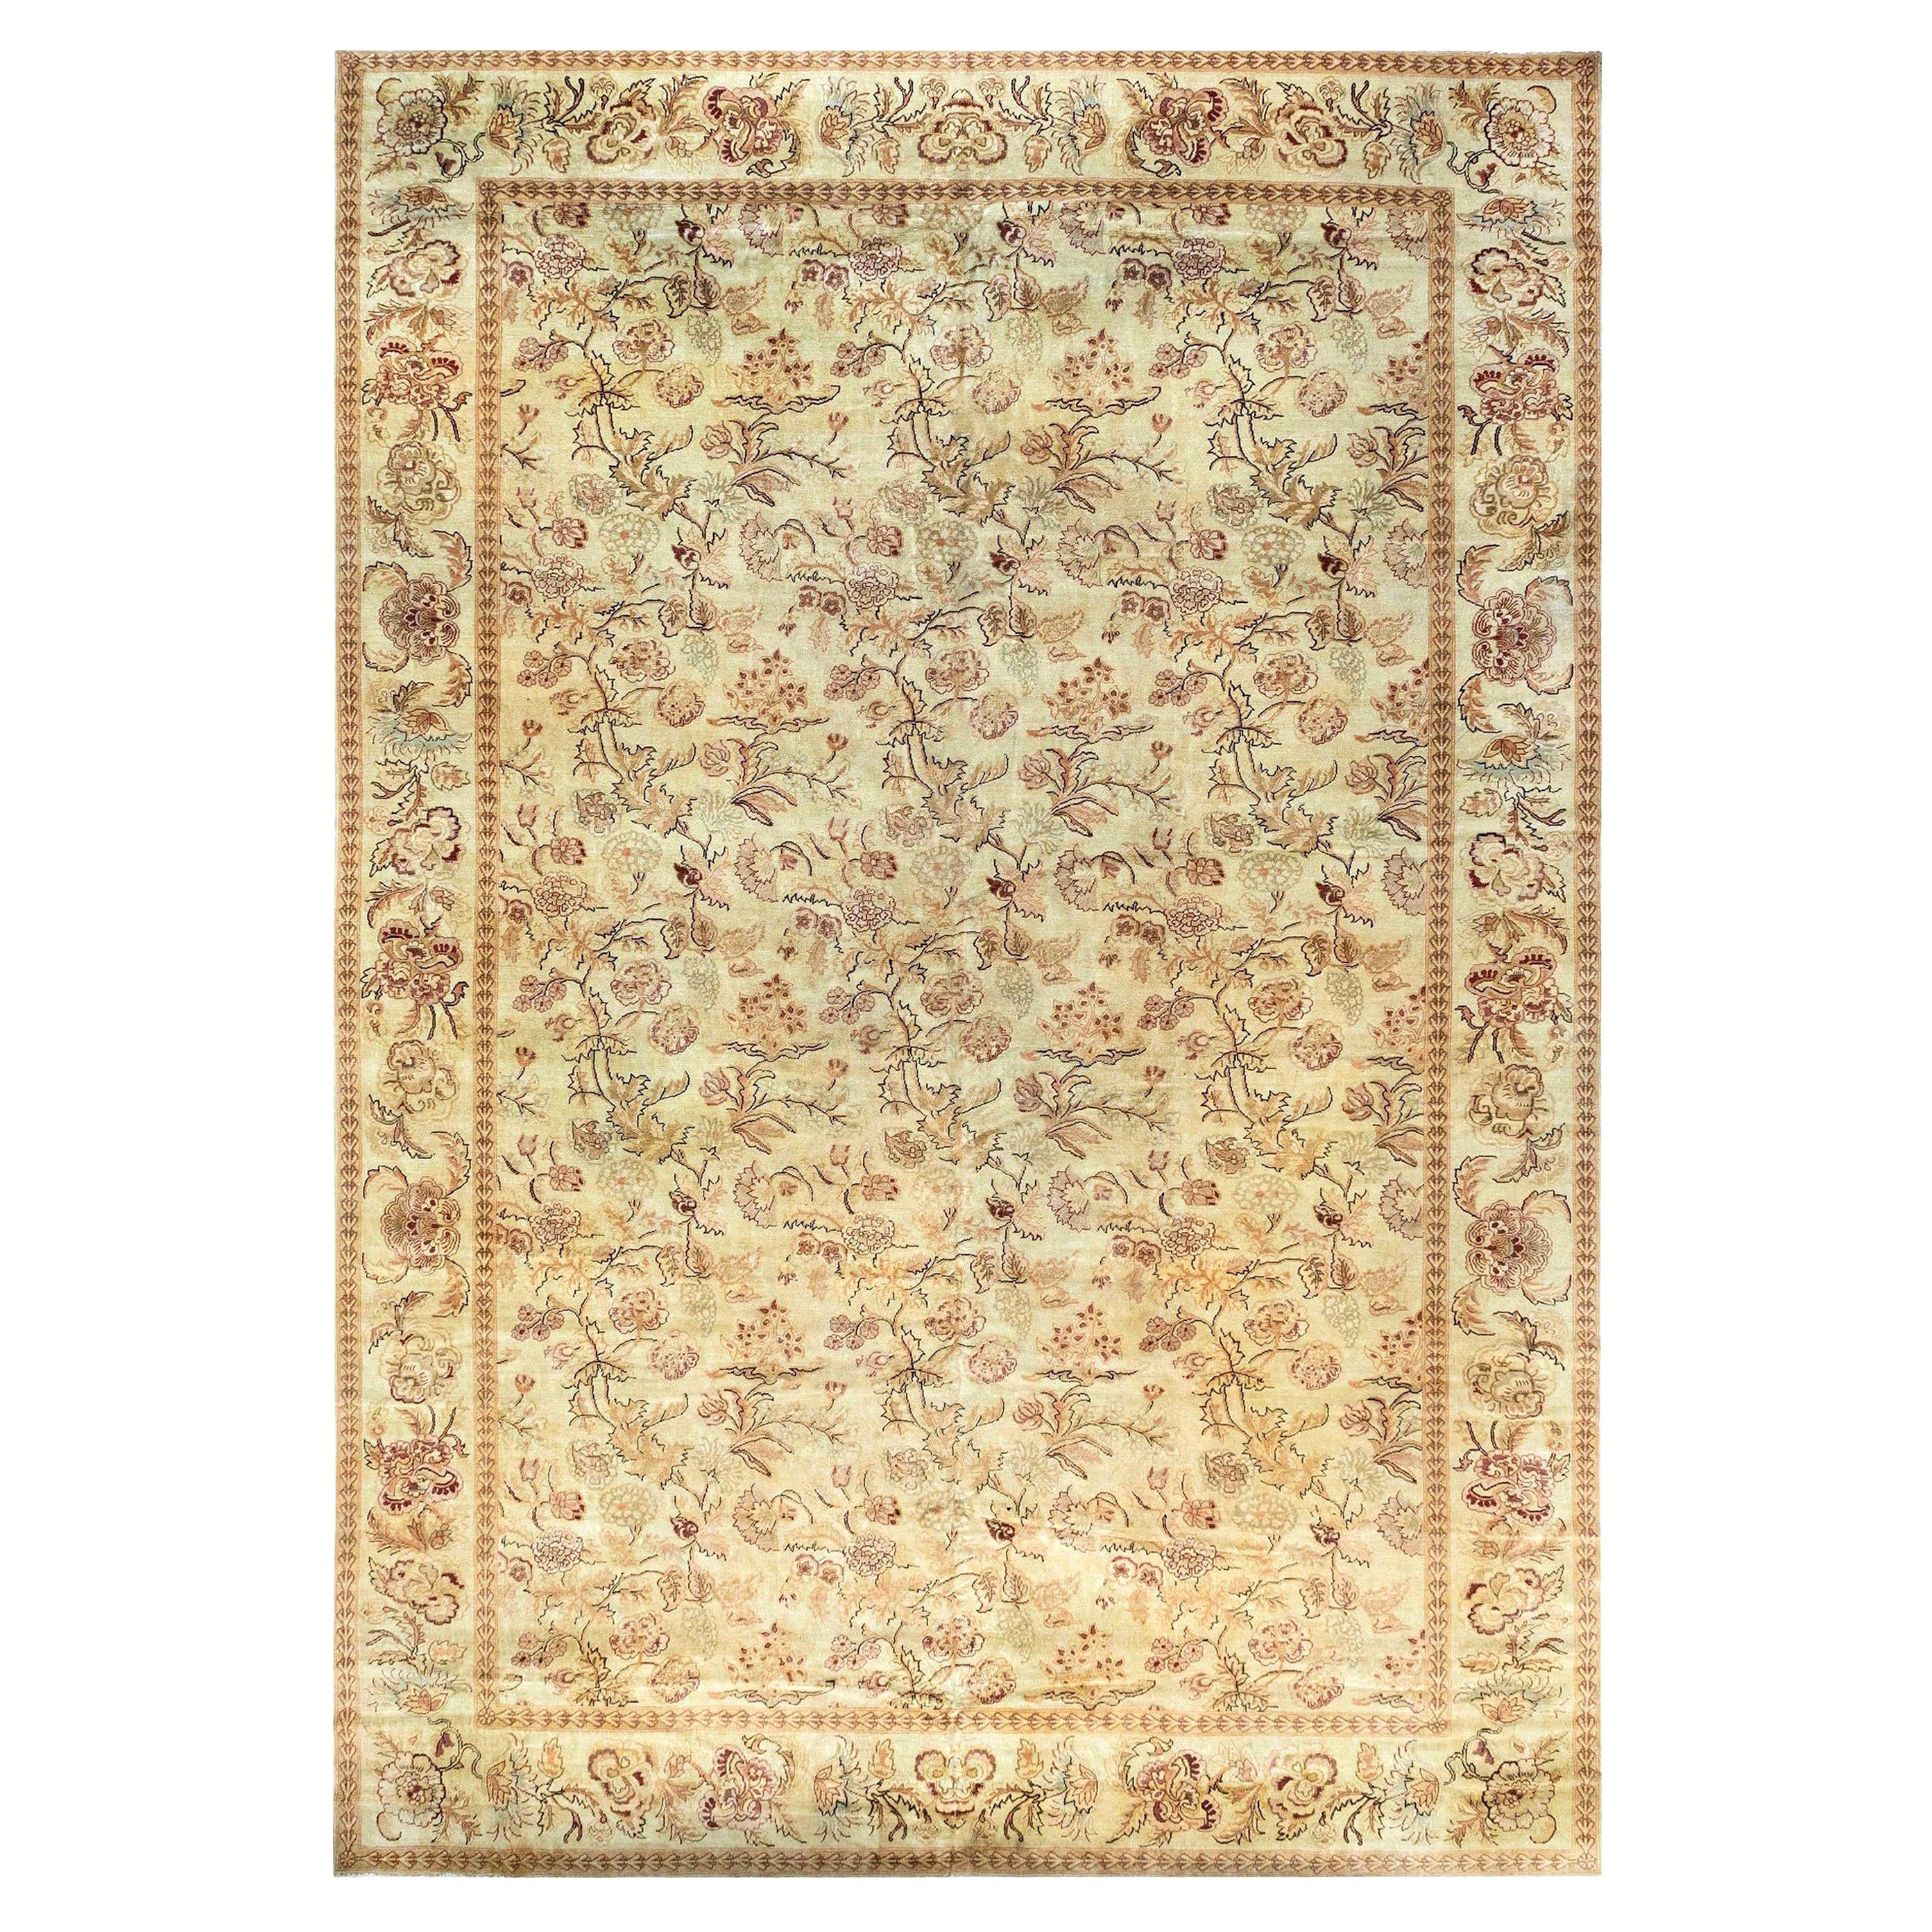 Contemporary Traditional Inspired Floral Design Rug by Doris Leslie Blau For Sale